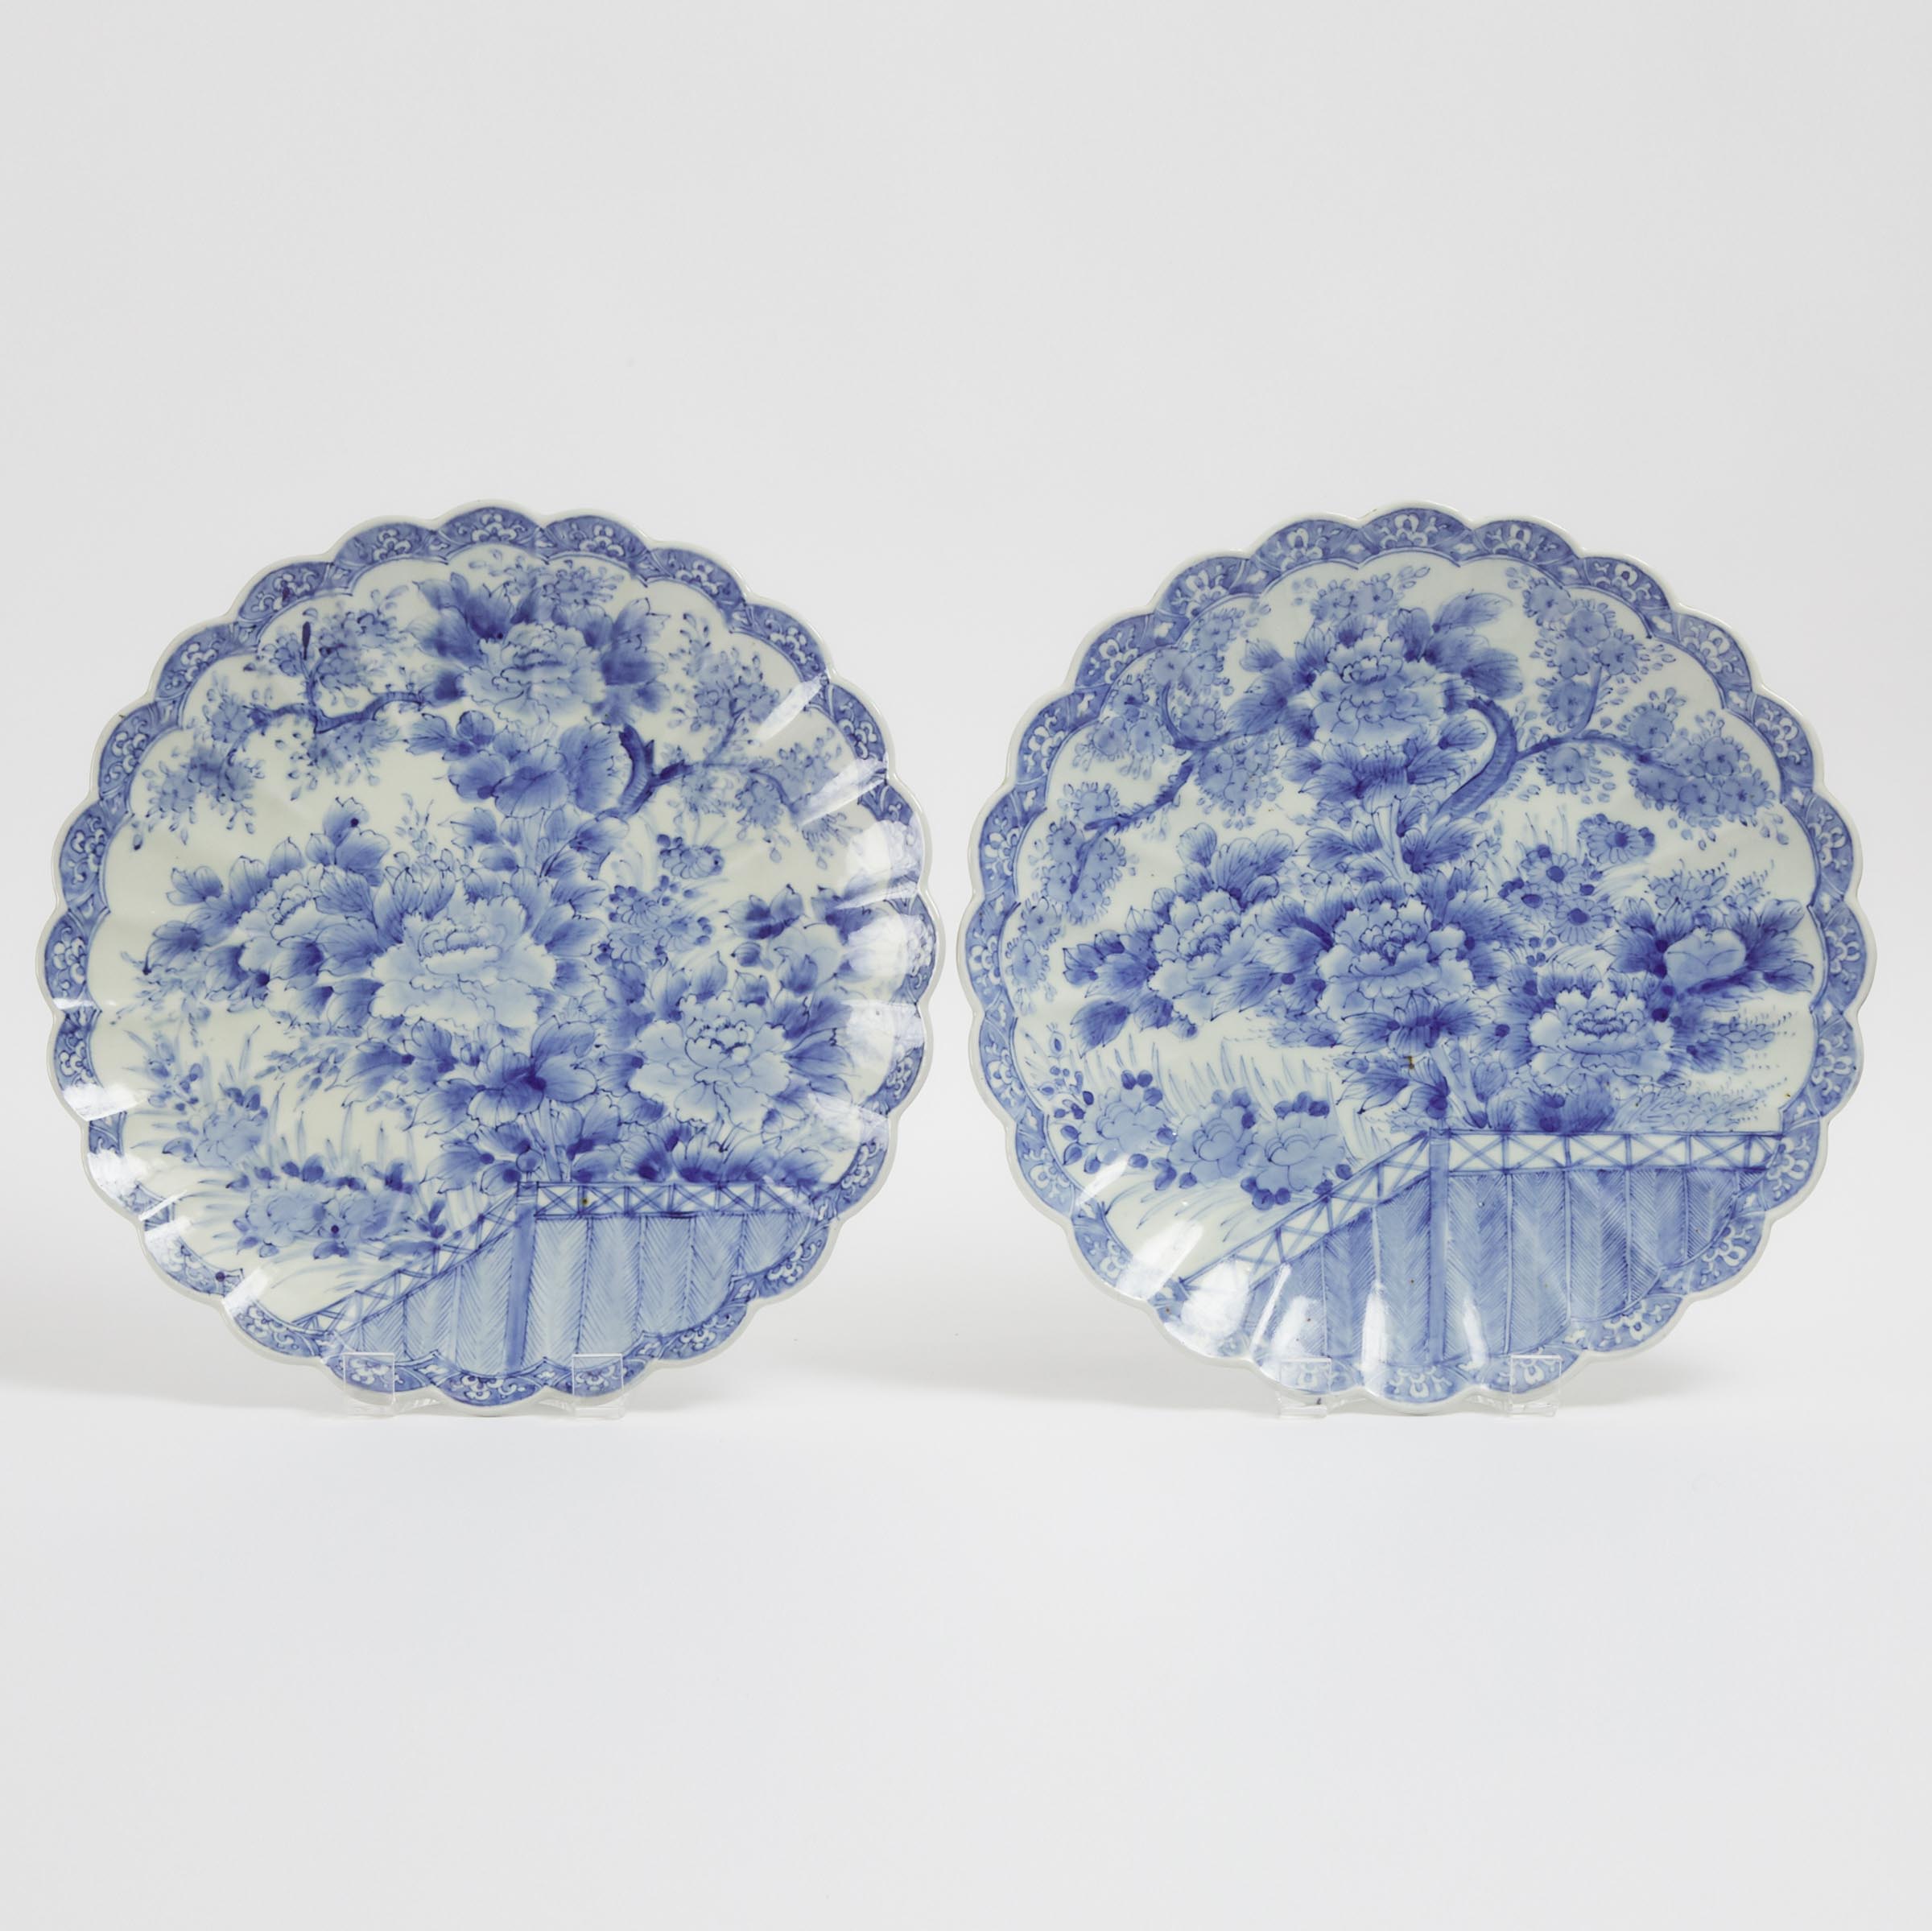 A Pair of Japanese Arita Blue and White Lobed Chargers, Edo/Meiji Period, 19th Century